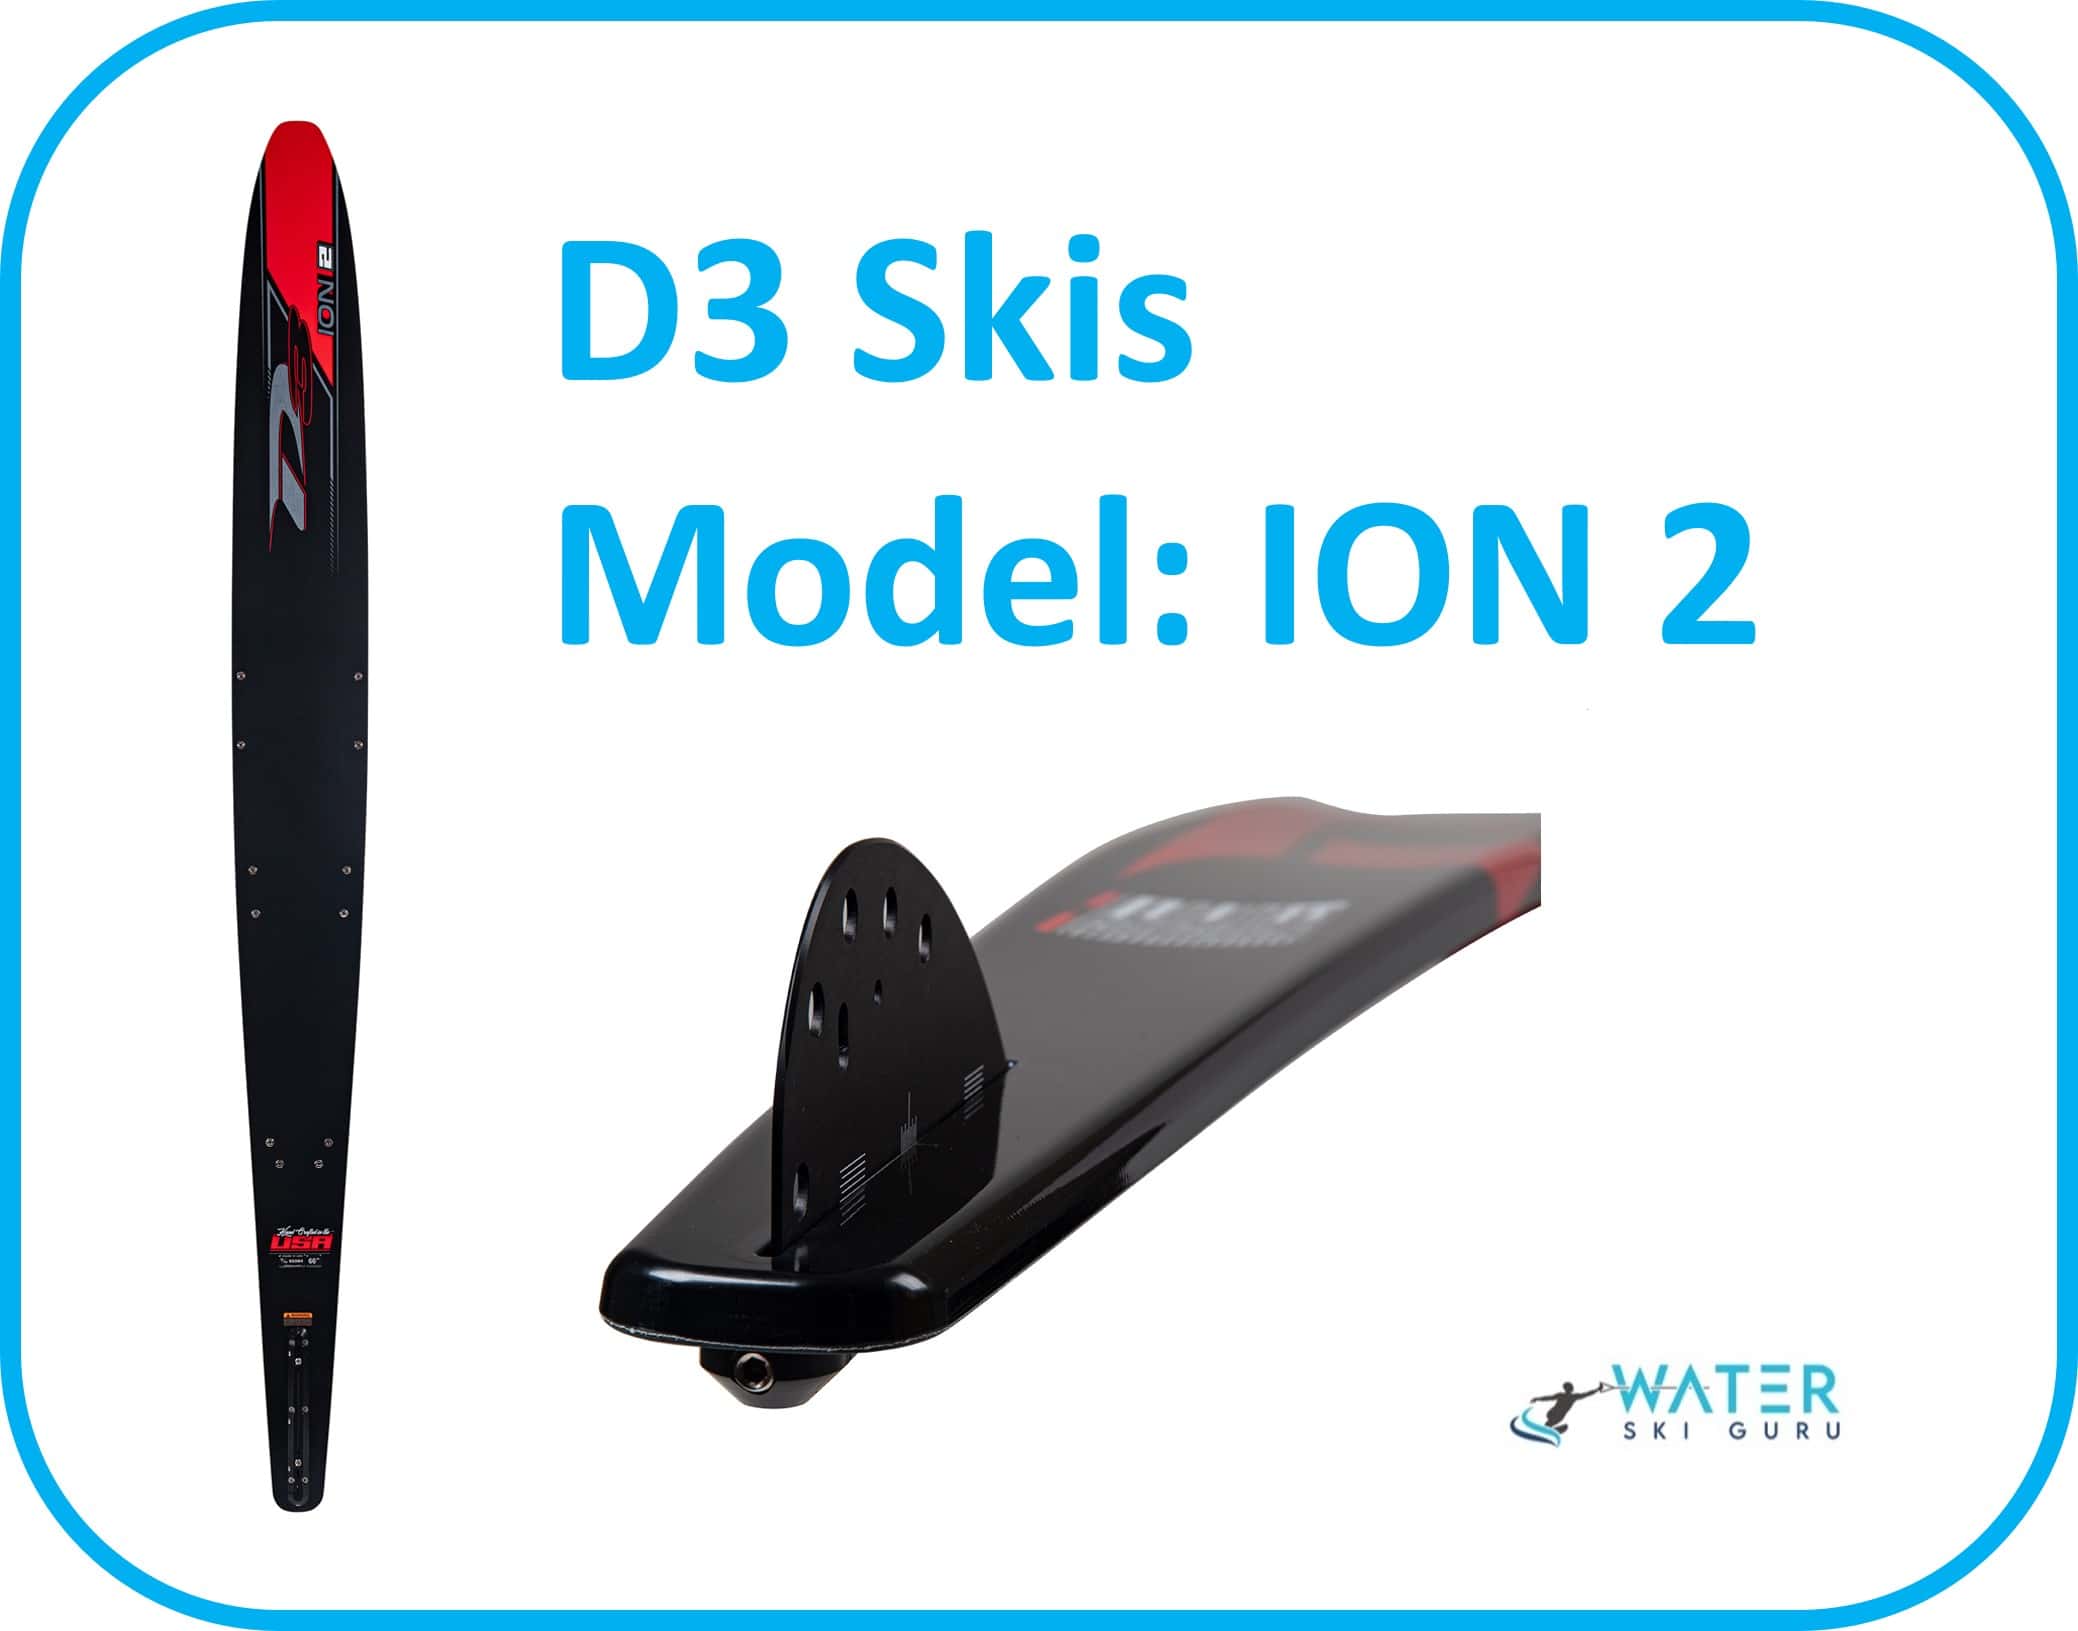 D3 Skis Model ION 2